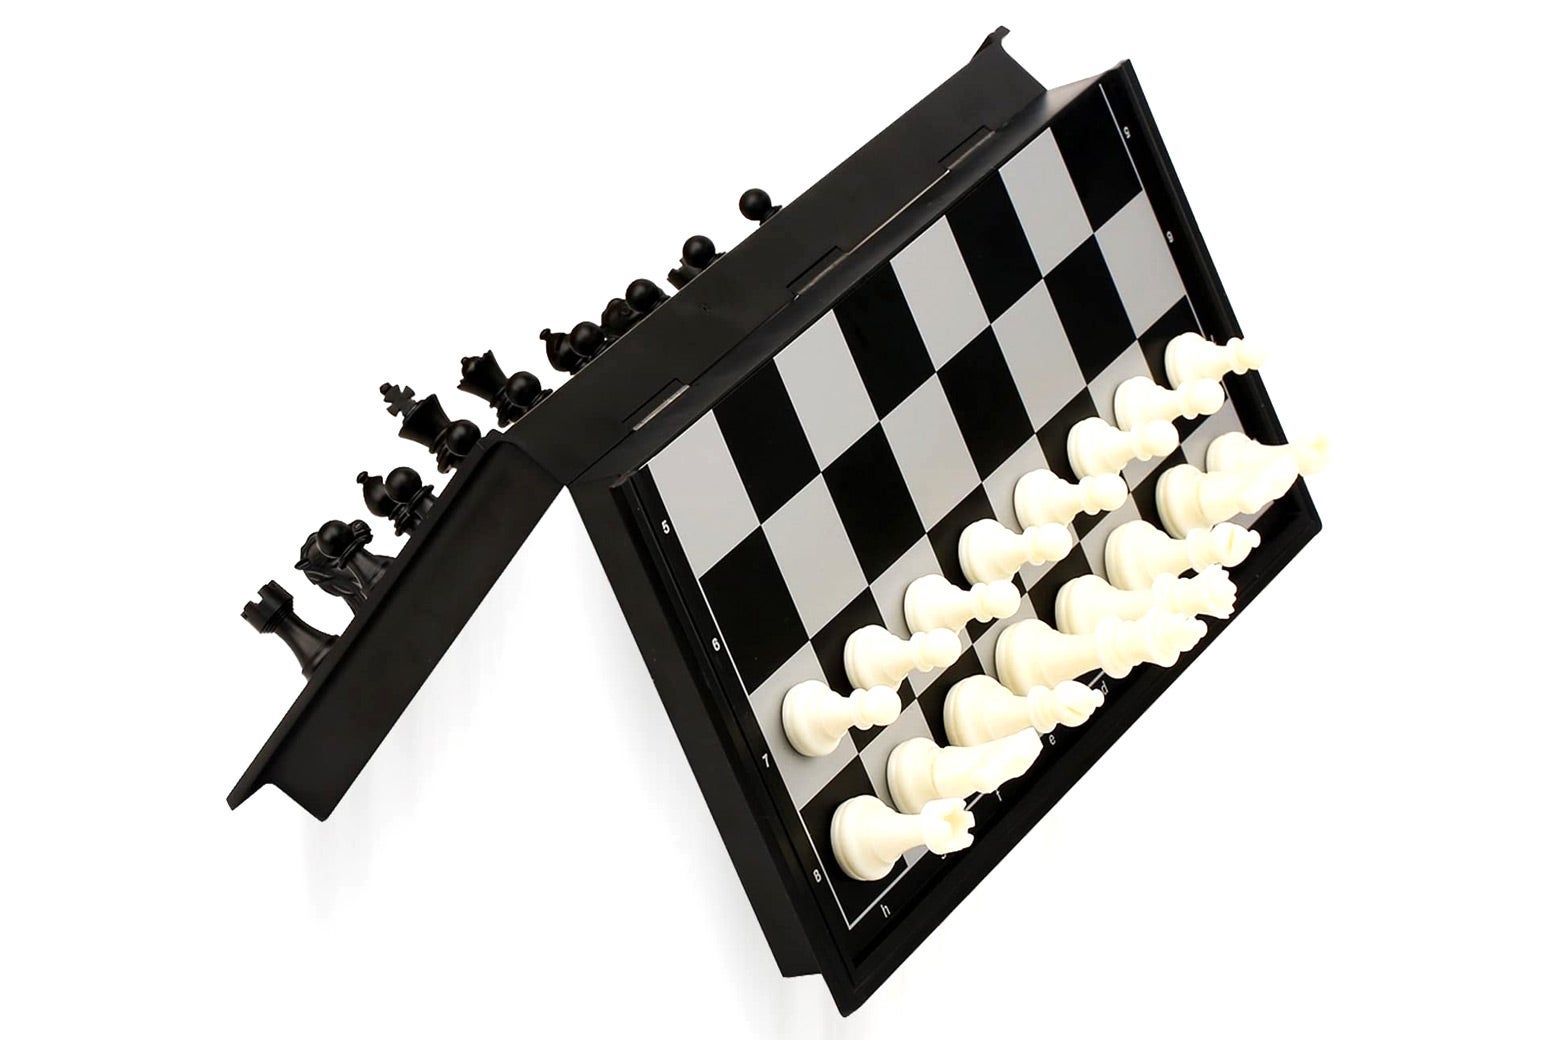 Magnetic chess set